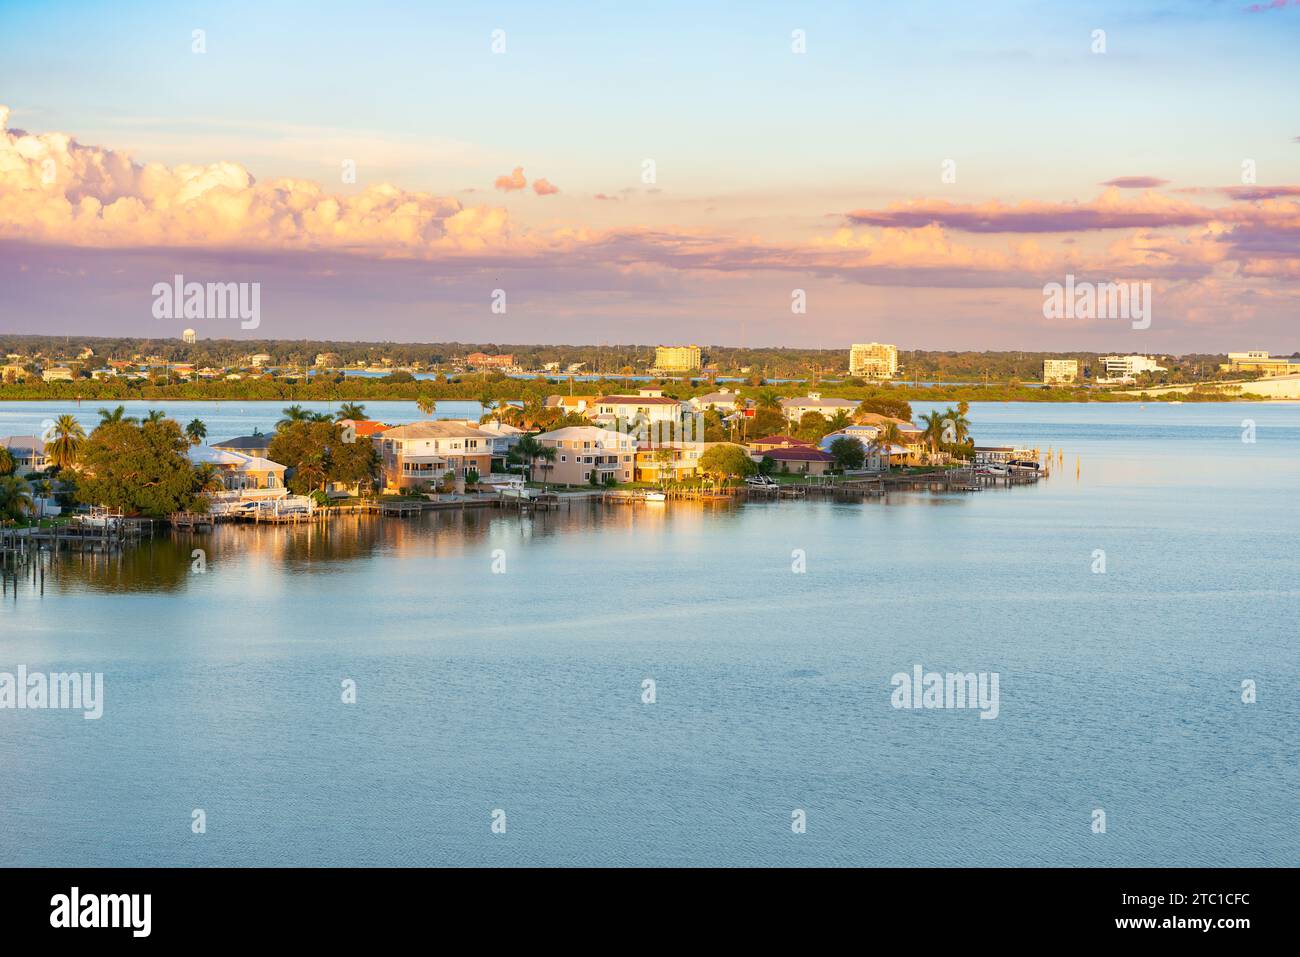 beautiful evening seaside scenery at Clearwater Beach, Tampa Florida, US Stock Photo